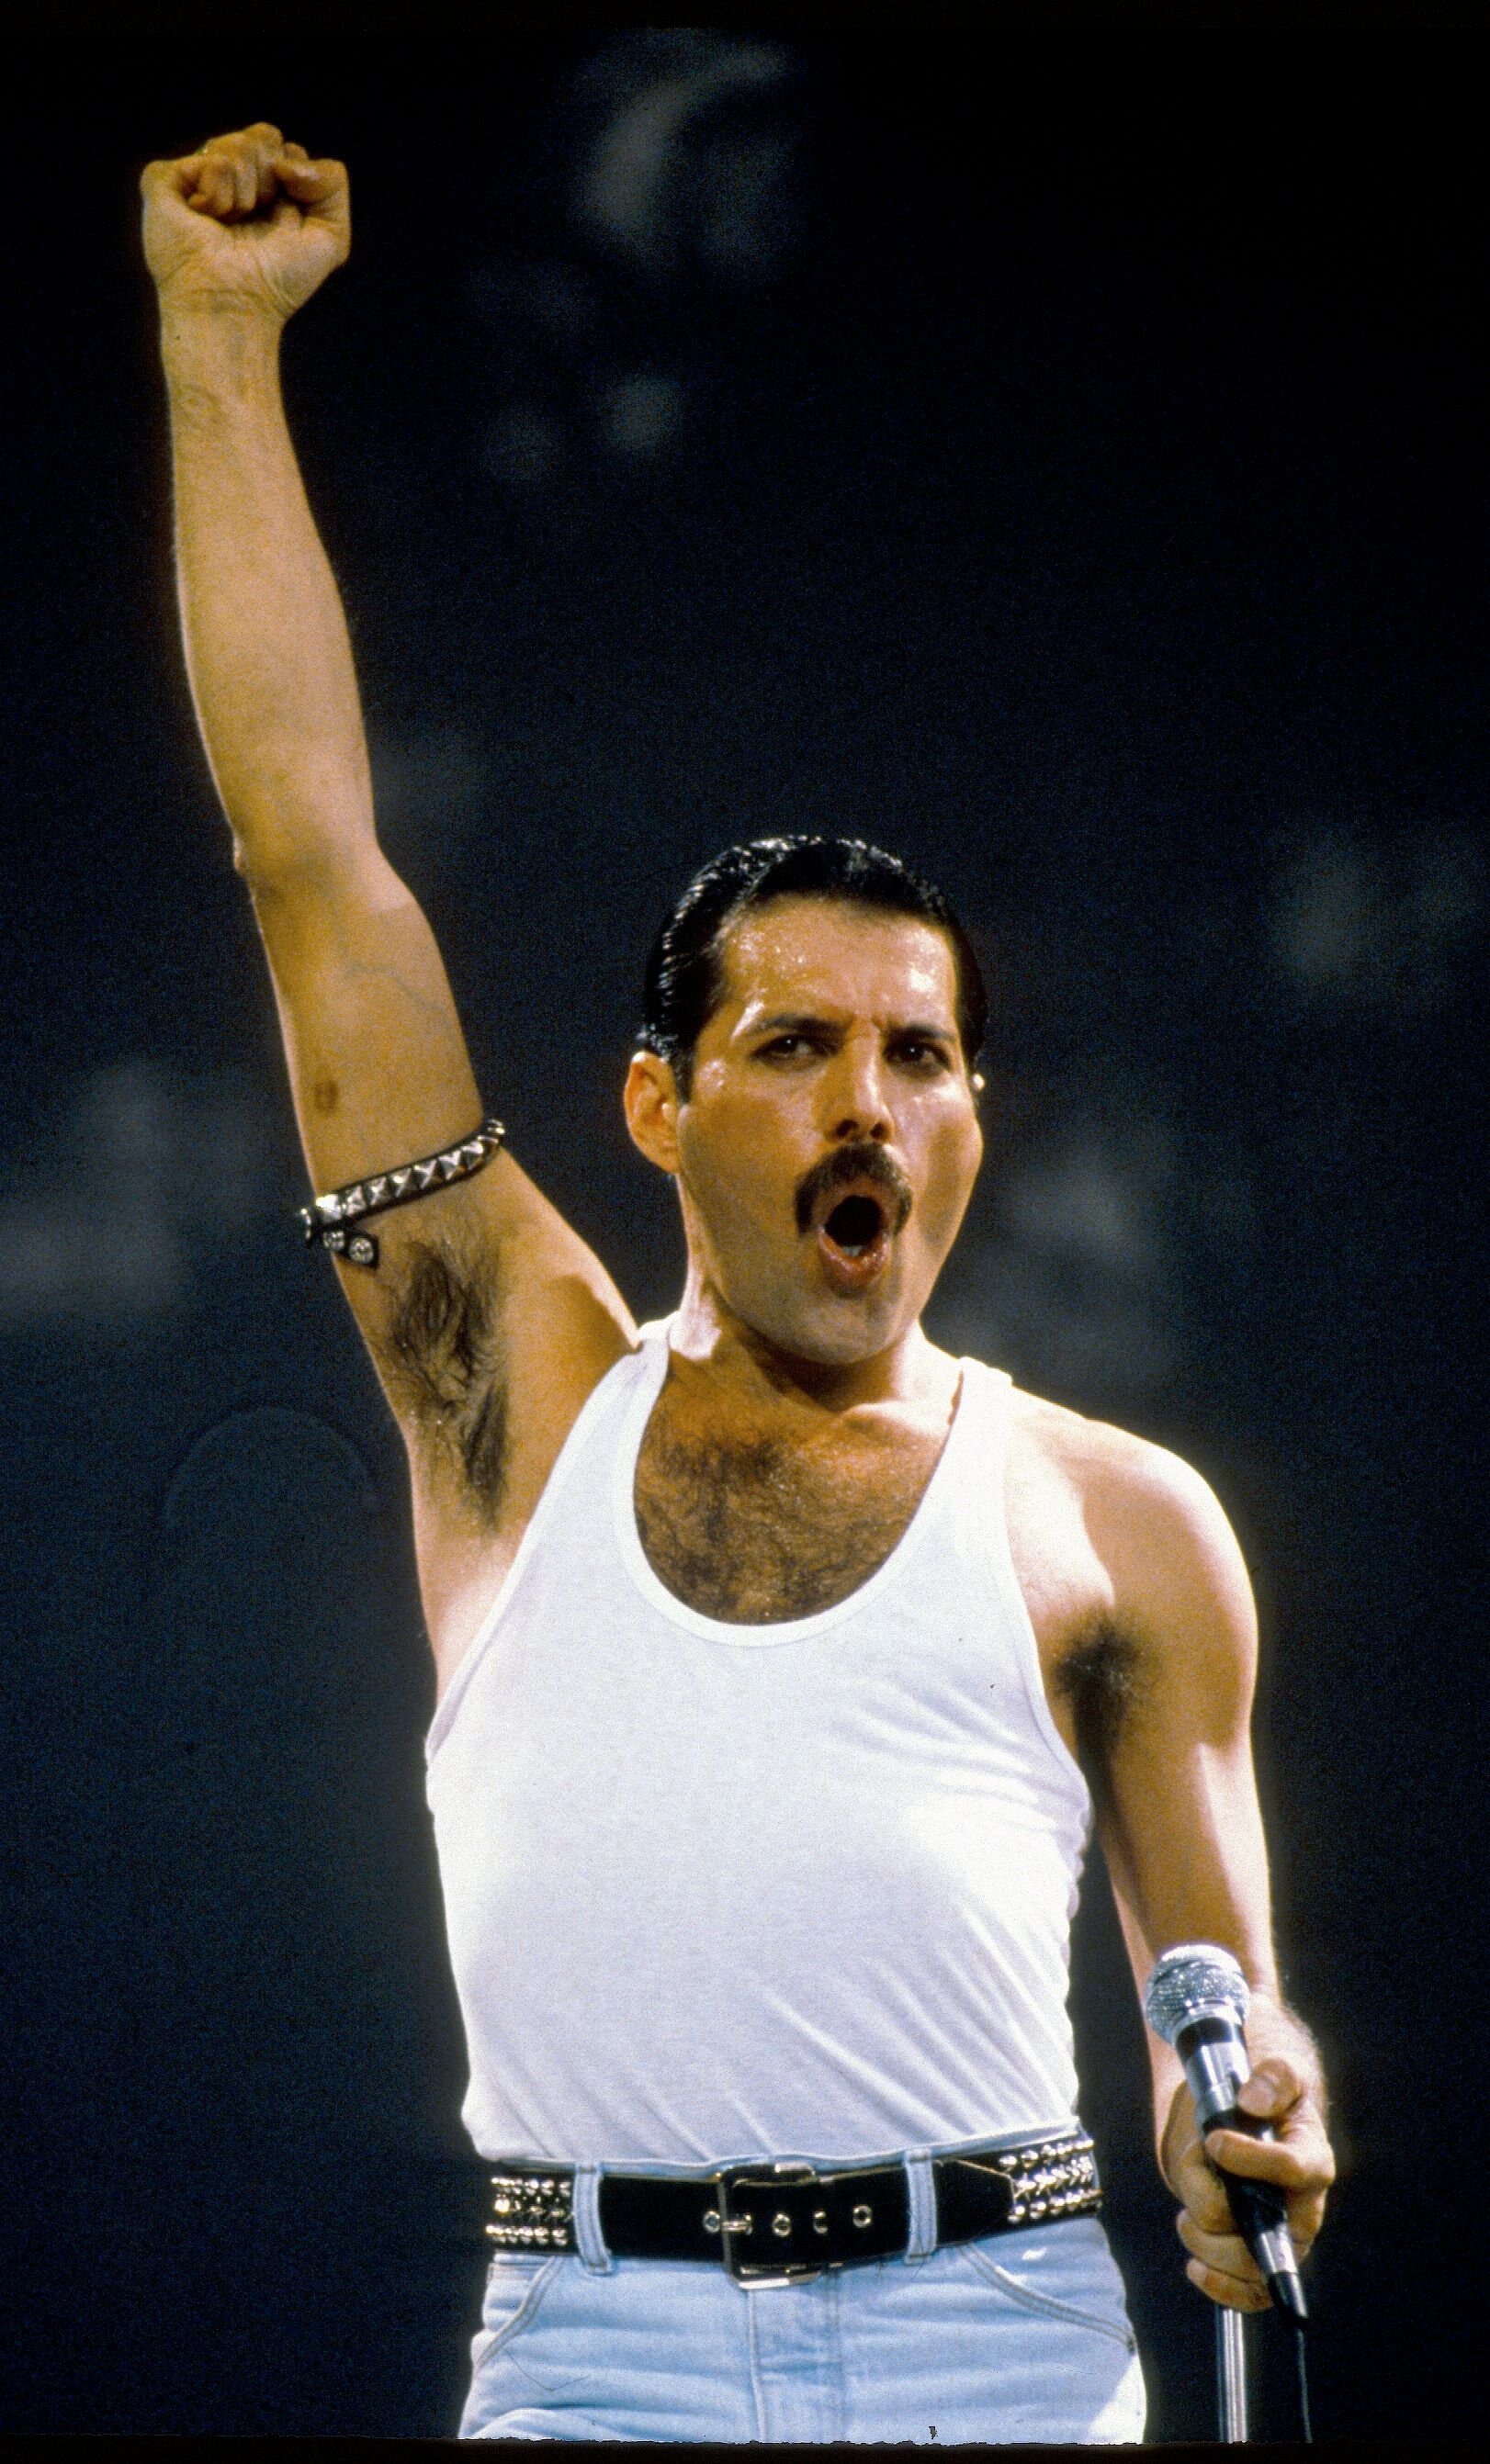 Freddie Mercury of the group Queen at the Live Aid concert on July 13, 1985 | Photo: Getty Images